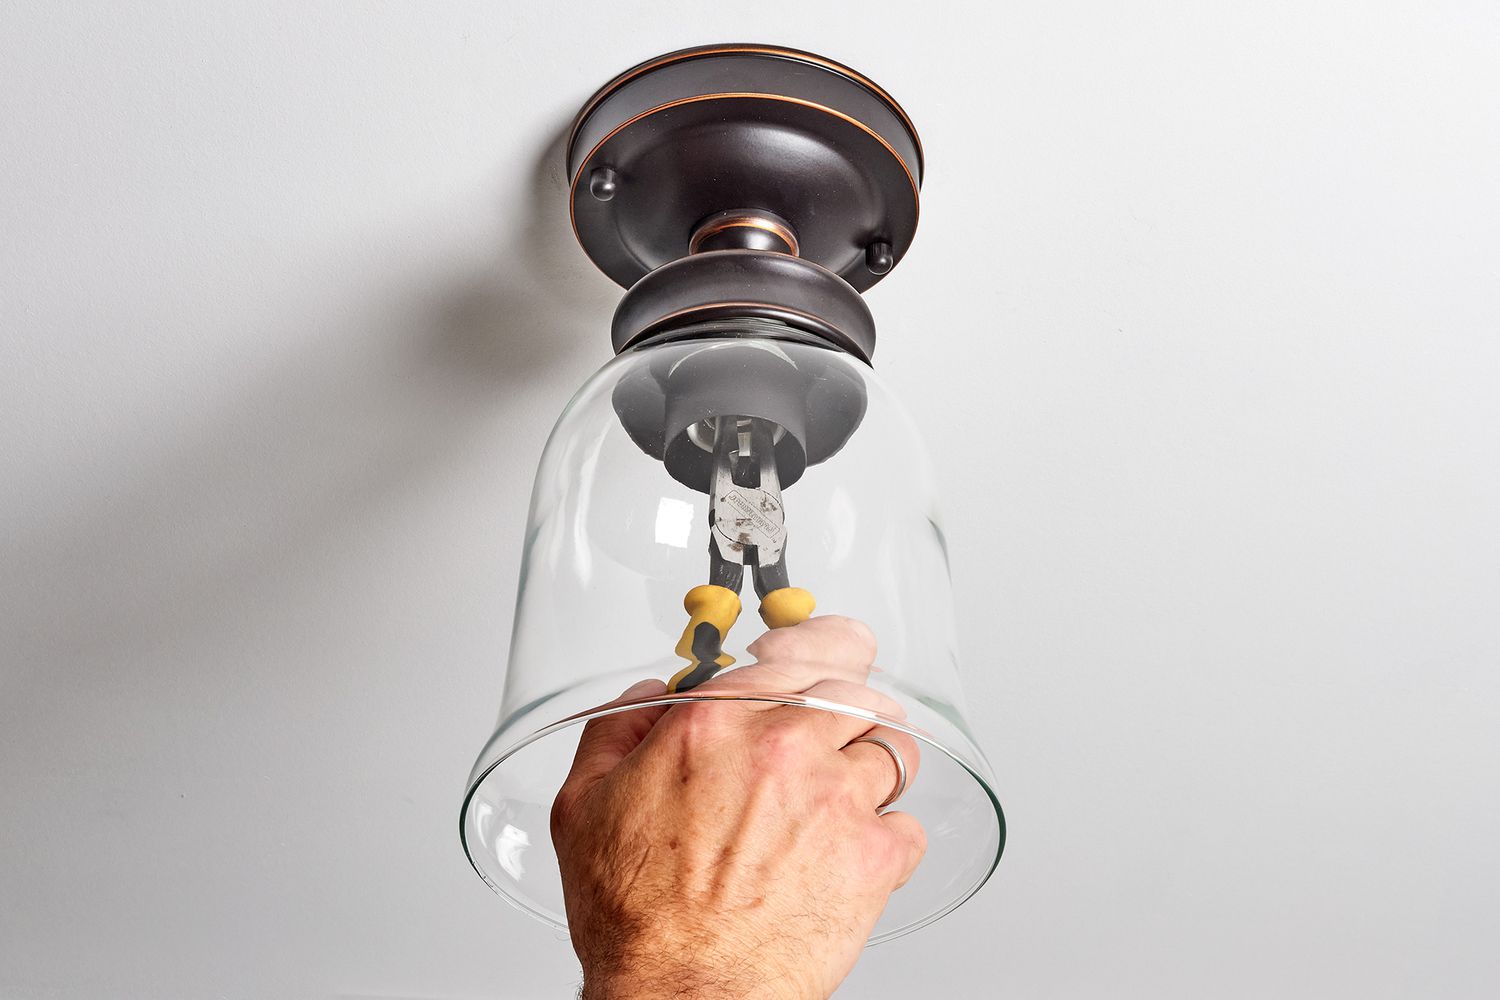 The Ultimate Hack For Replacing Bulbs On A 25-Foot High Ceiling!